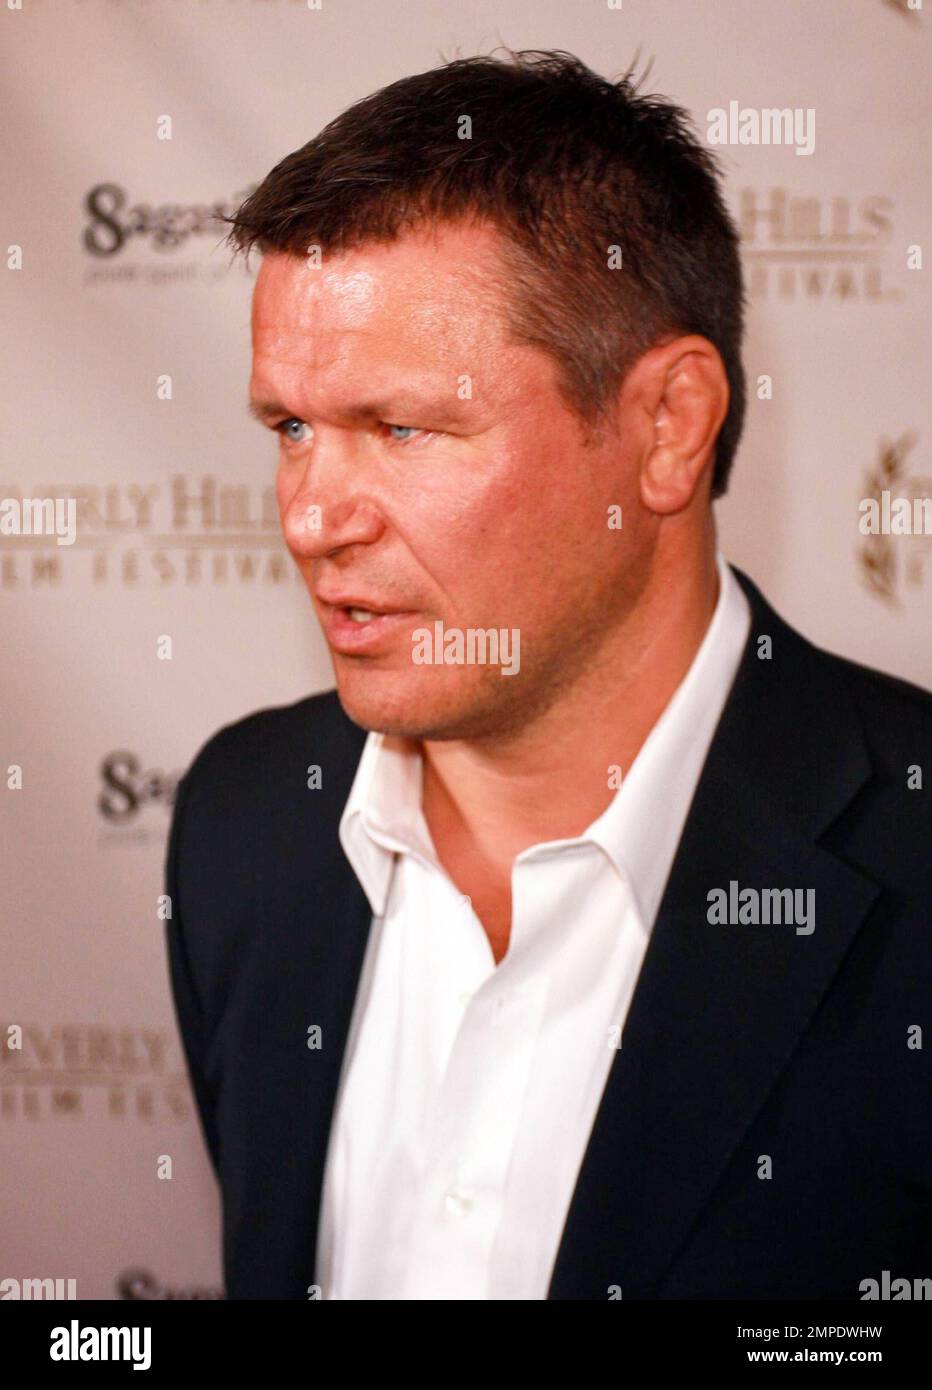 Oleg Taktarov arrives to the world premiere of "As Good As Dead" at the 10th Annual Beverly Hills Film Festival at the Clarity Theater. Los Angeles, CA. 04/14/10.   . Stock Photo